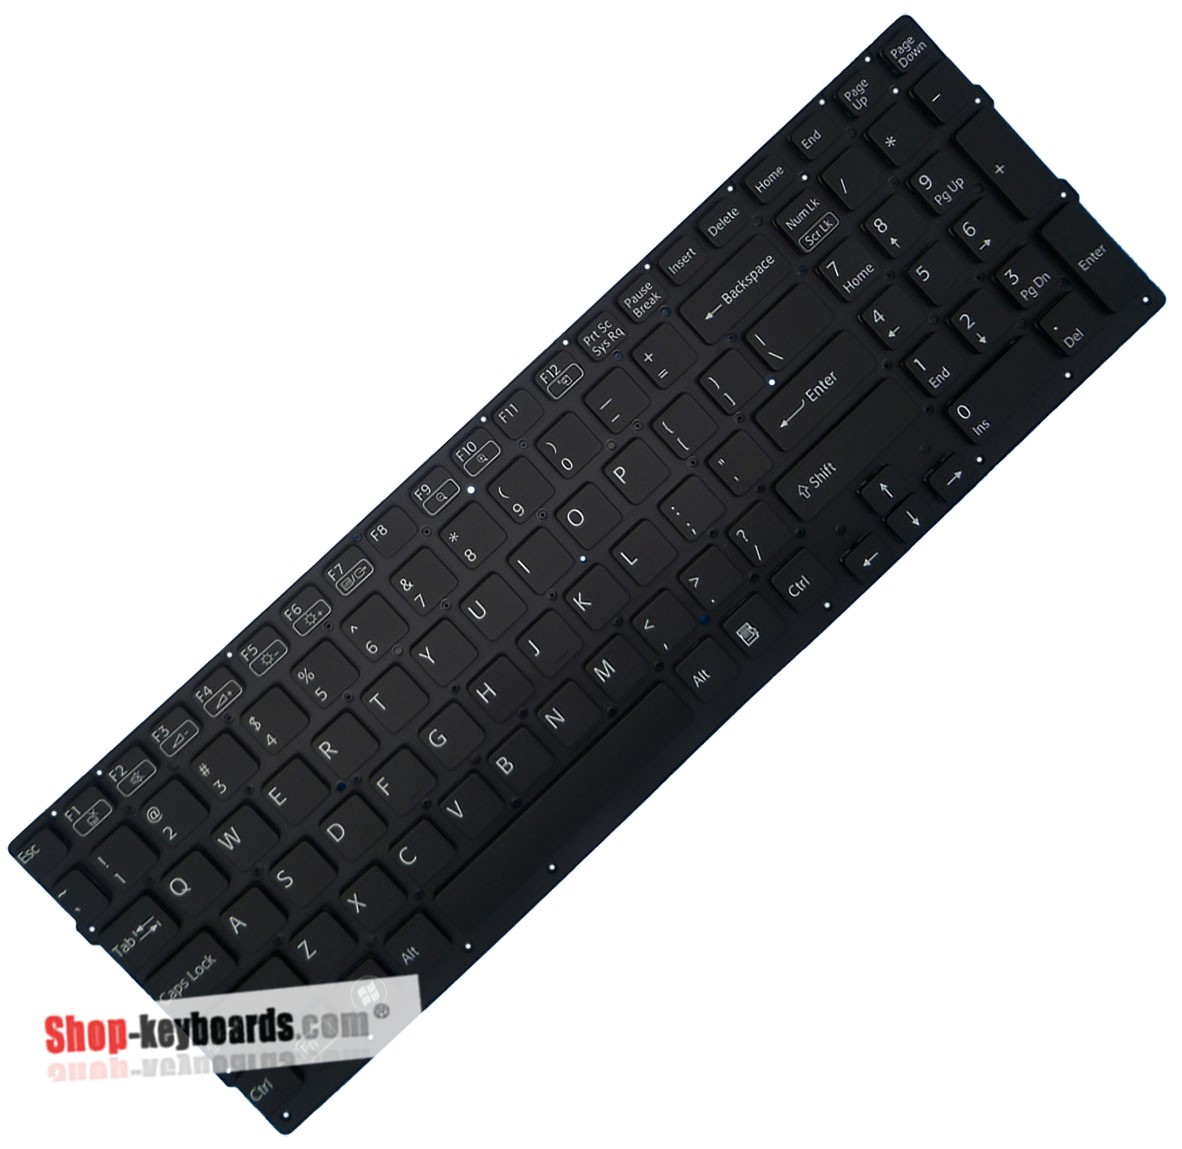 Sony VAIO VPC-CB2M0E Keyboard replacement